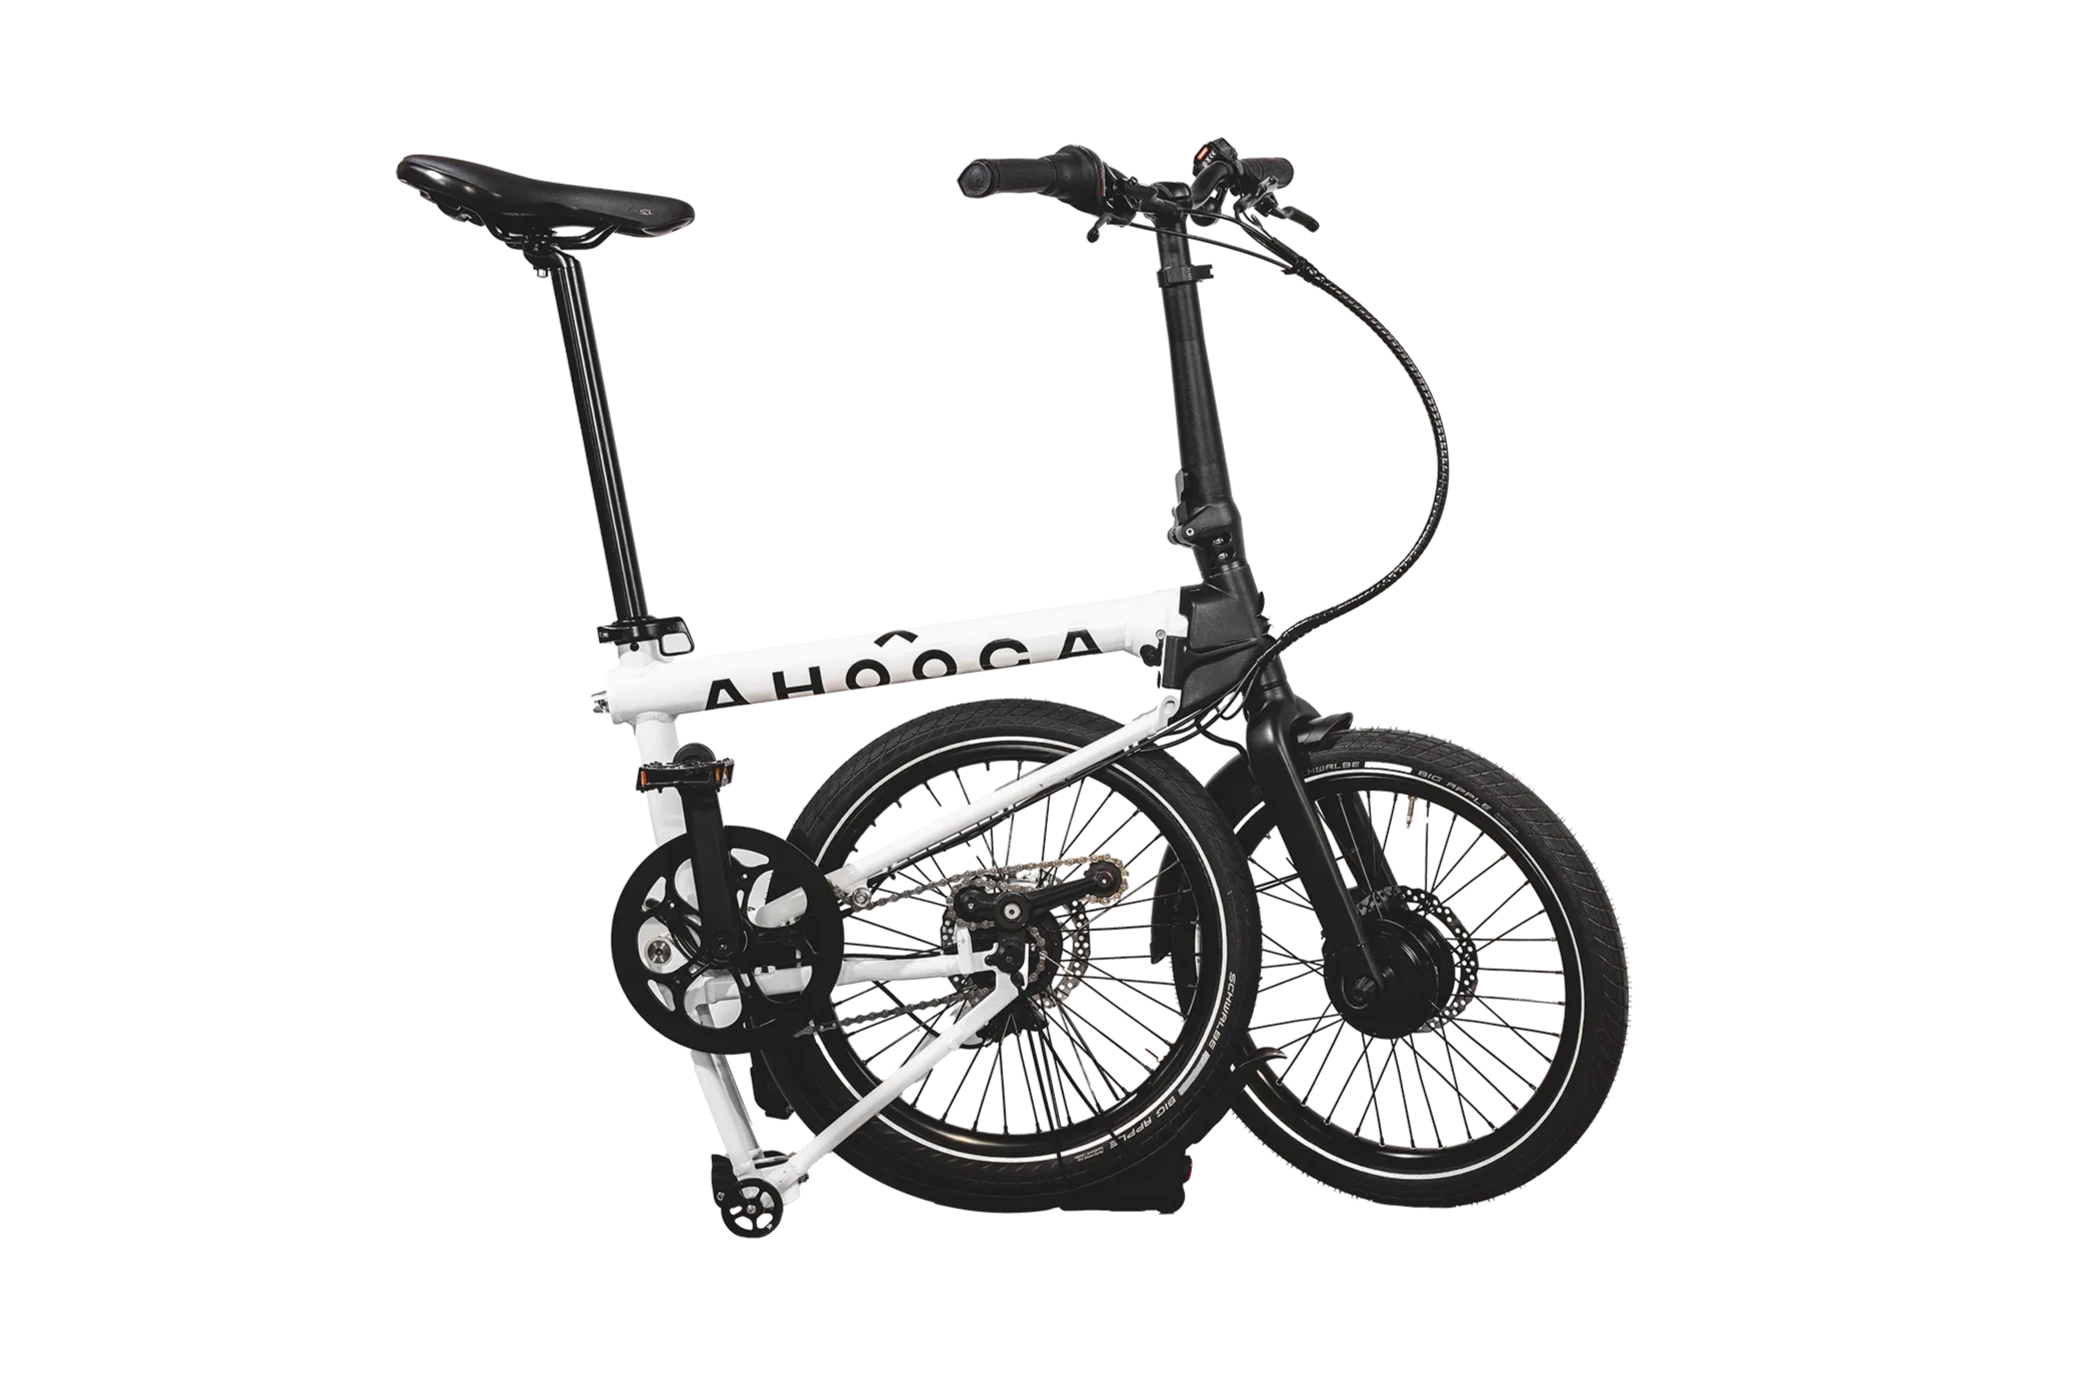 A product image of the Ahooga Max folding electric bike showing the bike in its half-folded configuration. The bike frame is white with black accents. The Ahooga Max folding electric bike is available to buy from Bleeper.